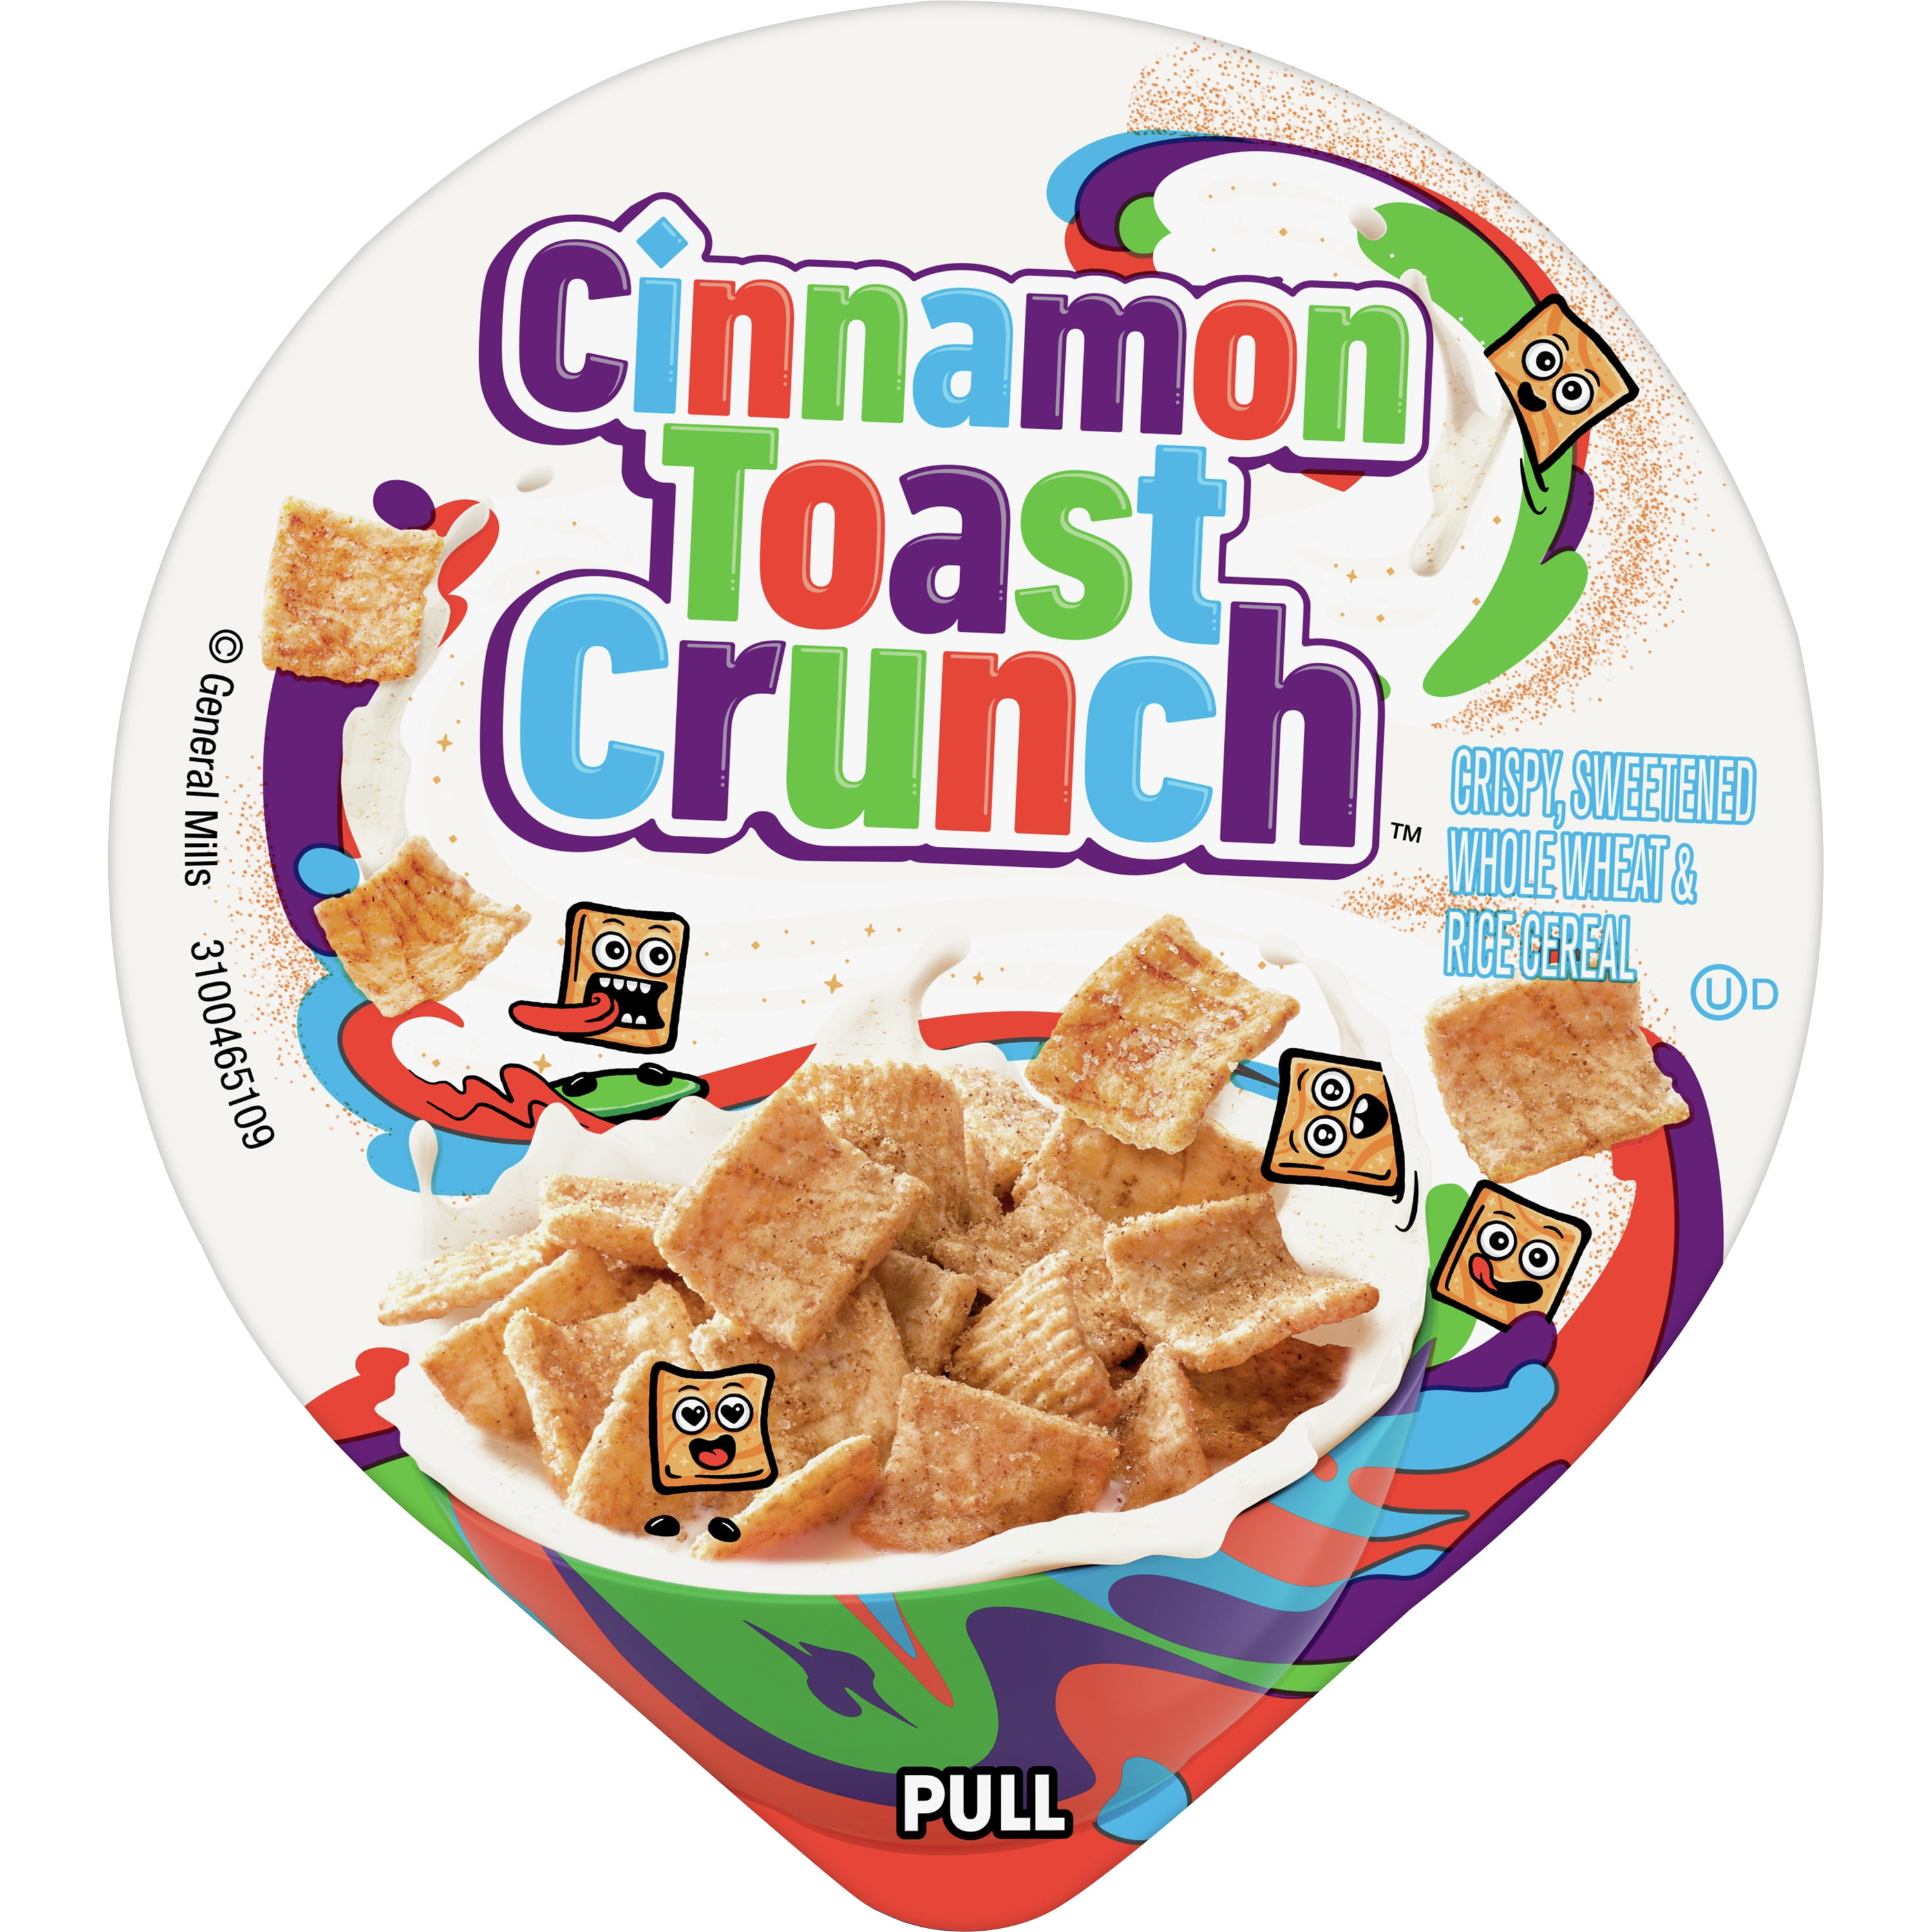 Chilled Cereal To Go Container Crunch Breakfast Cereal Cup